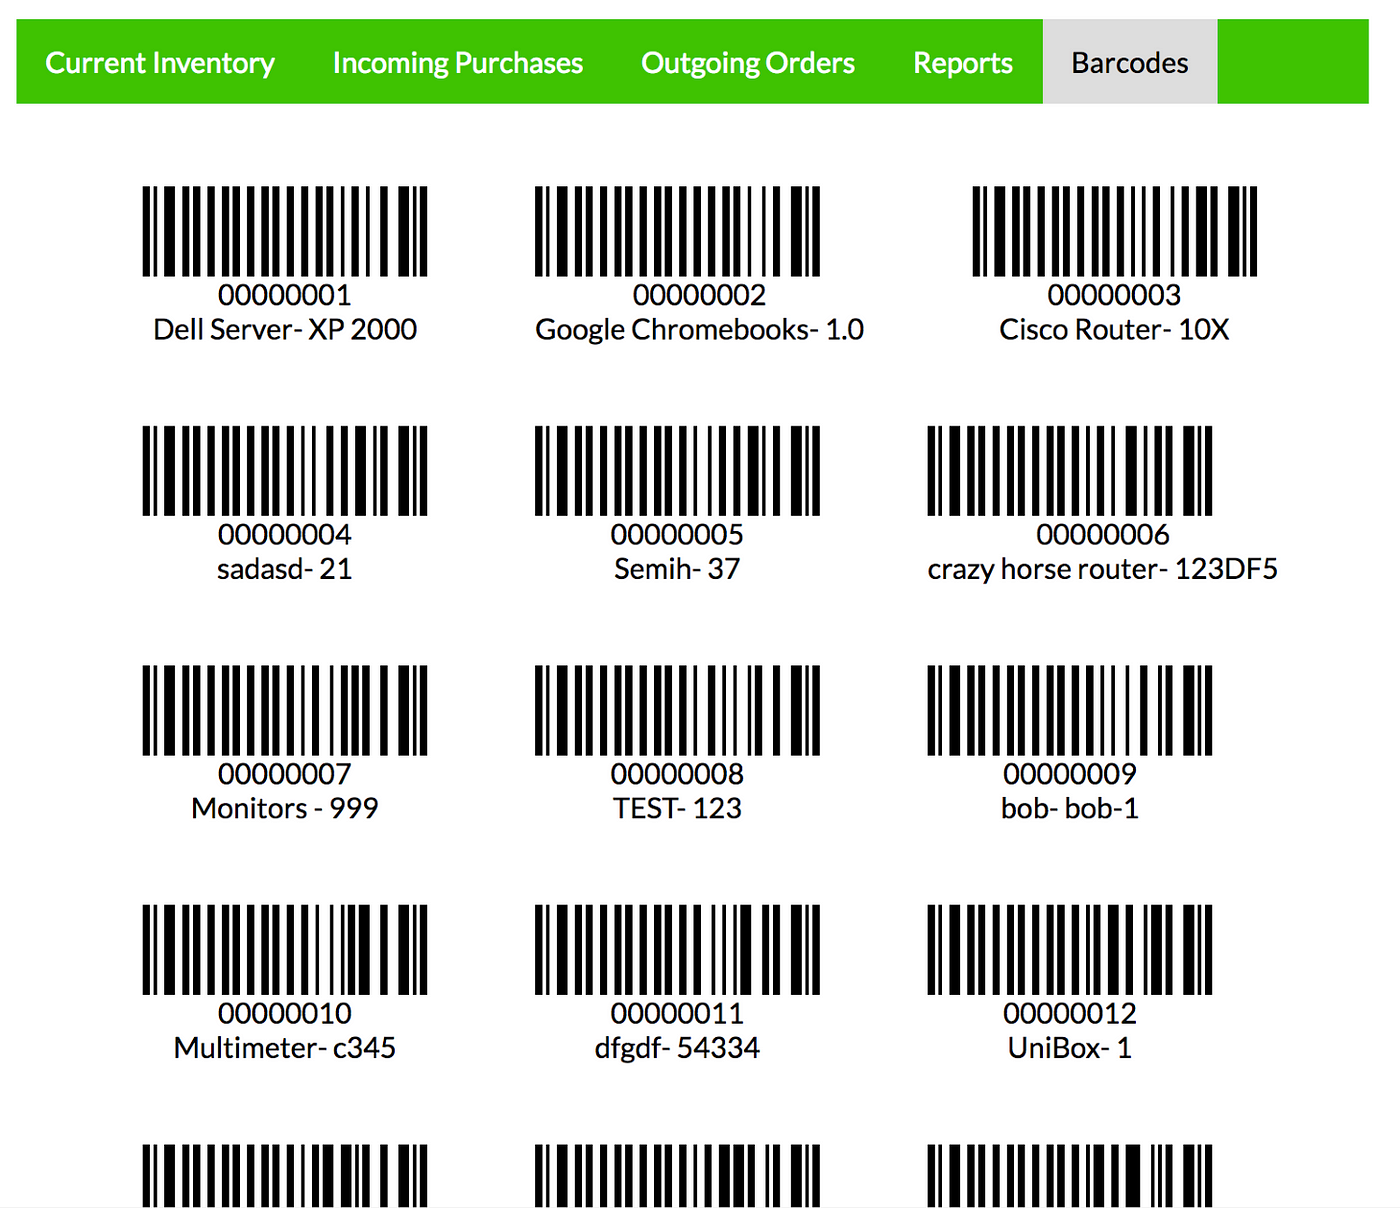 Inventory Management System with Barcode Scanner in PHP, a Definitive Guide  | by Richard | Medium